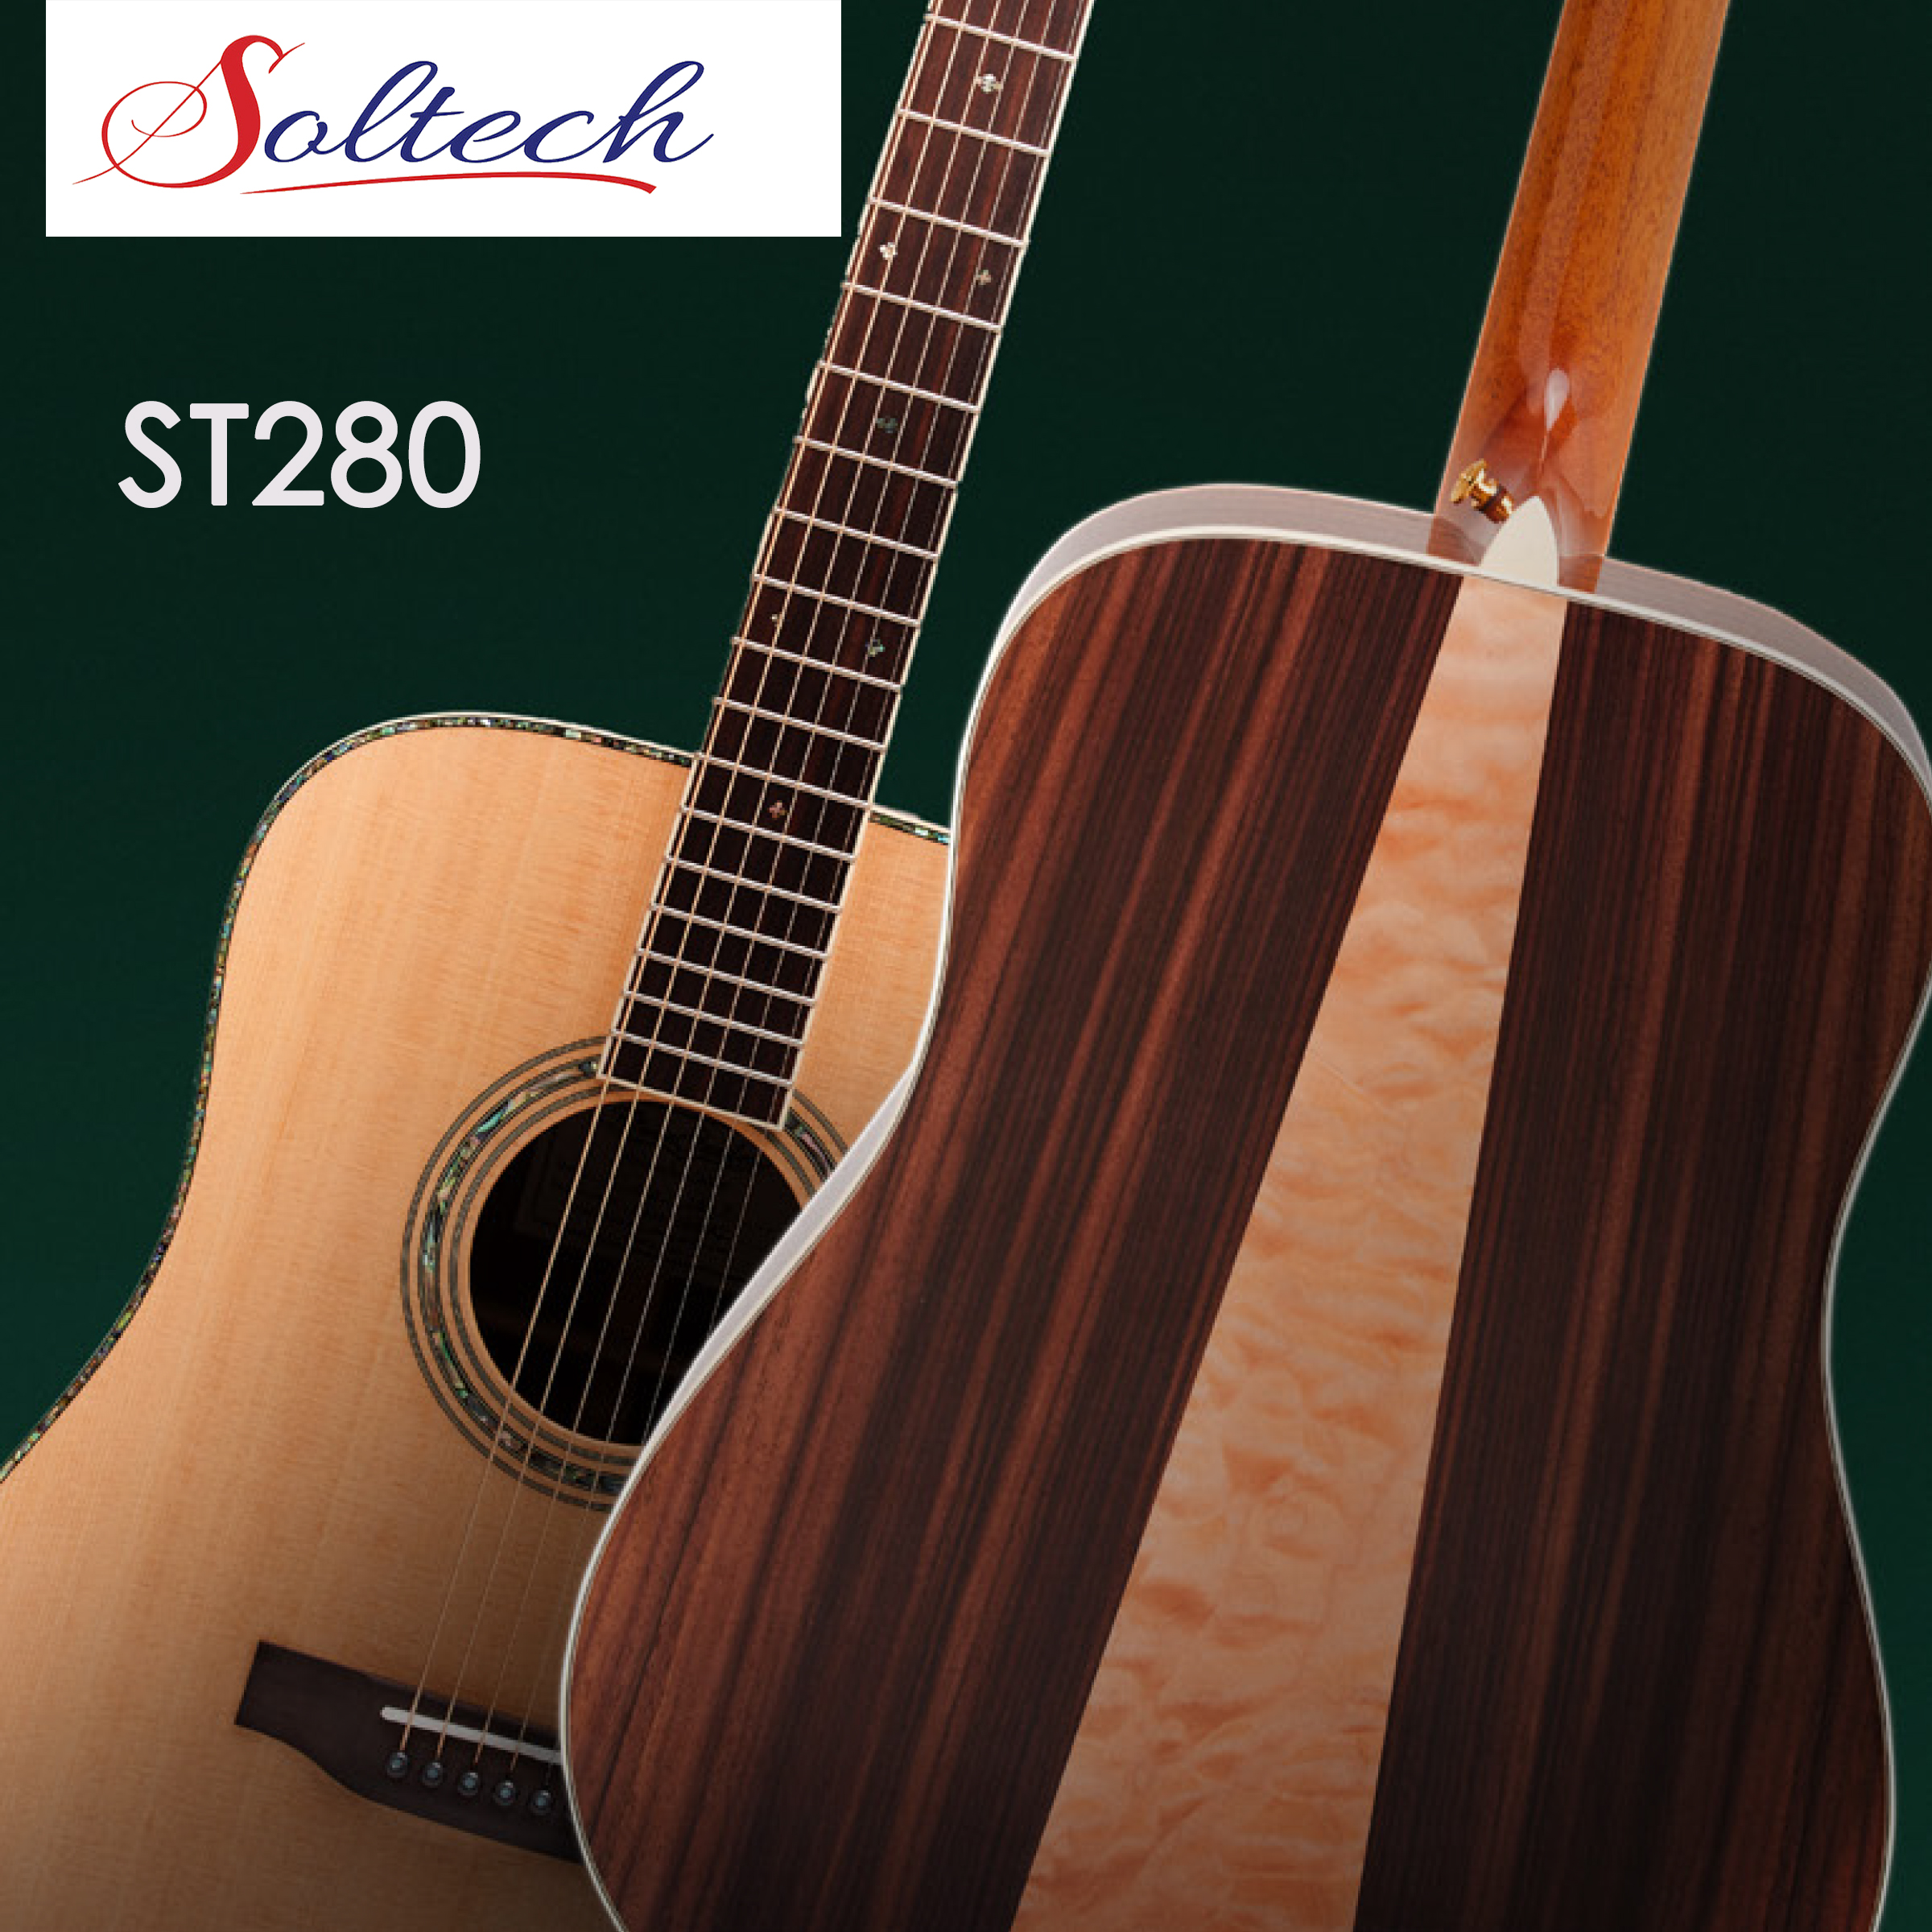 ST280 Acoustic Guitar with Sitka Wood - Guizhou Soltech 